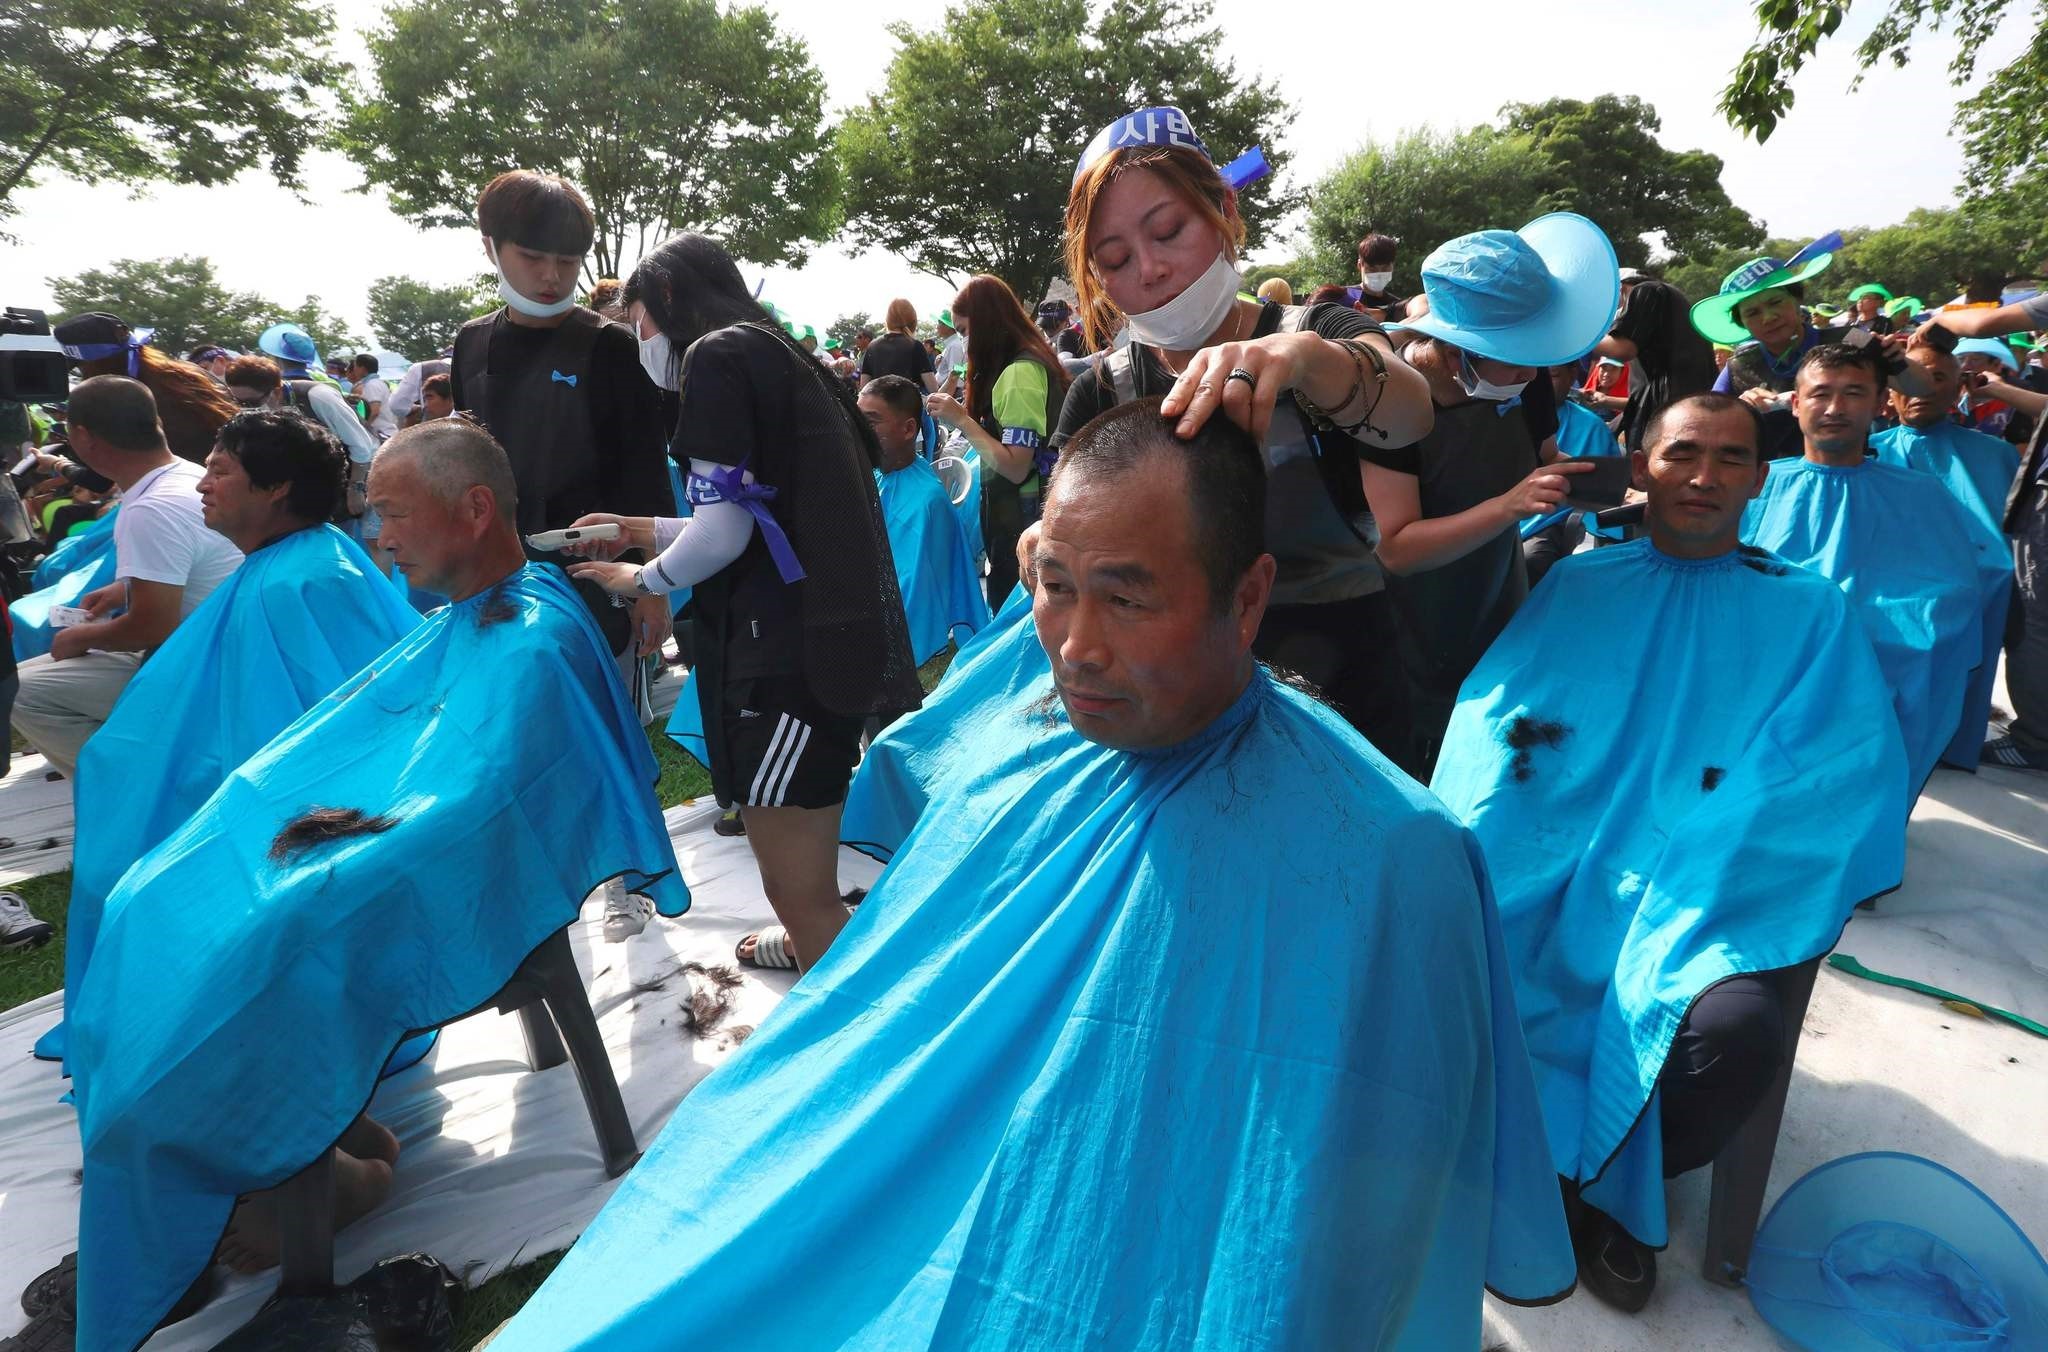 More than 900 Seongju residents have their heads shaved during a protest against the planned deployment of the US Terminal High Altitude Area Defense (THAAD) system at a local park in the southeastern town of Seongju on August 15, 2016. (AFP Photo)